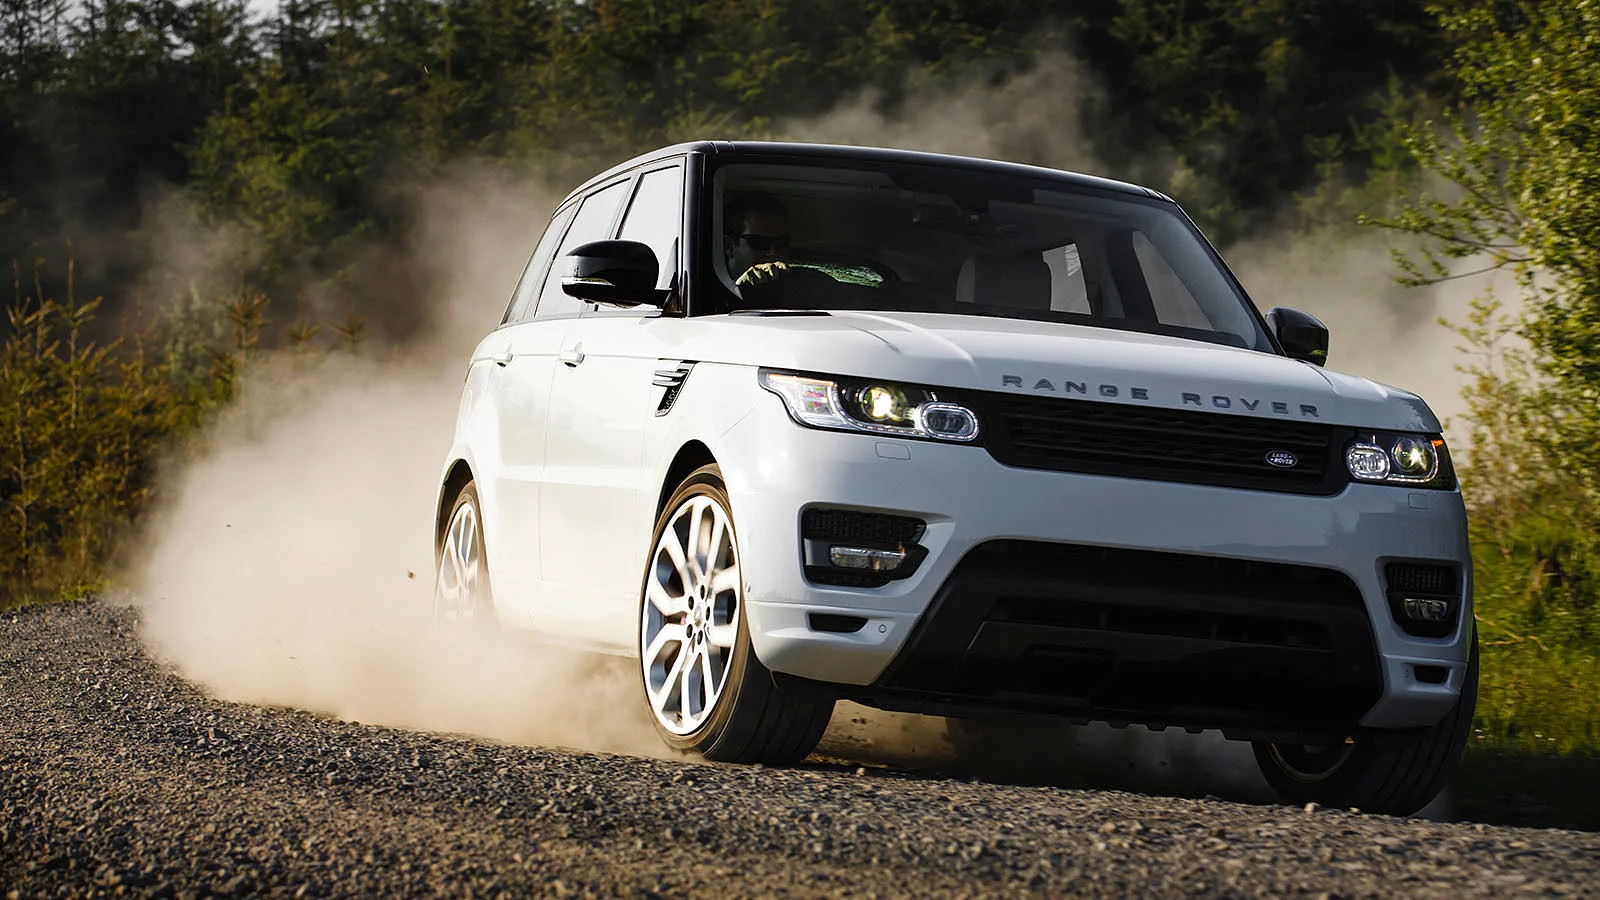 RANGE ROVER SPORT RIDE AND DRIVE